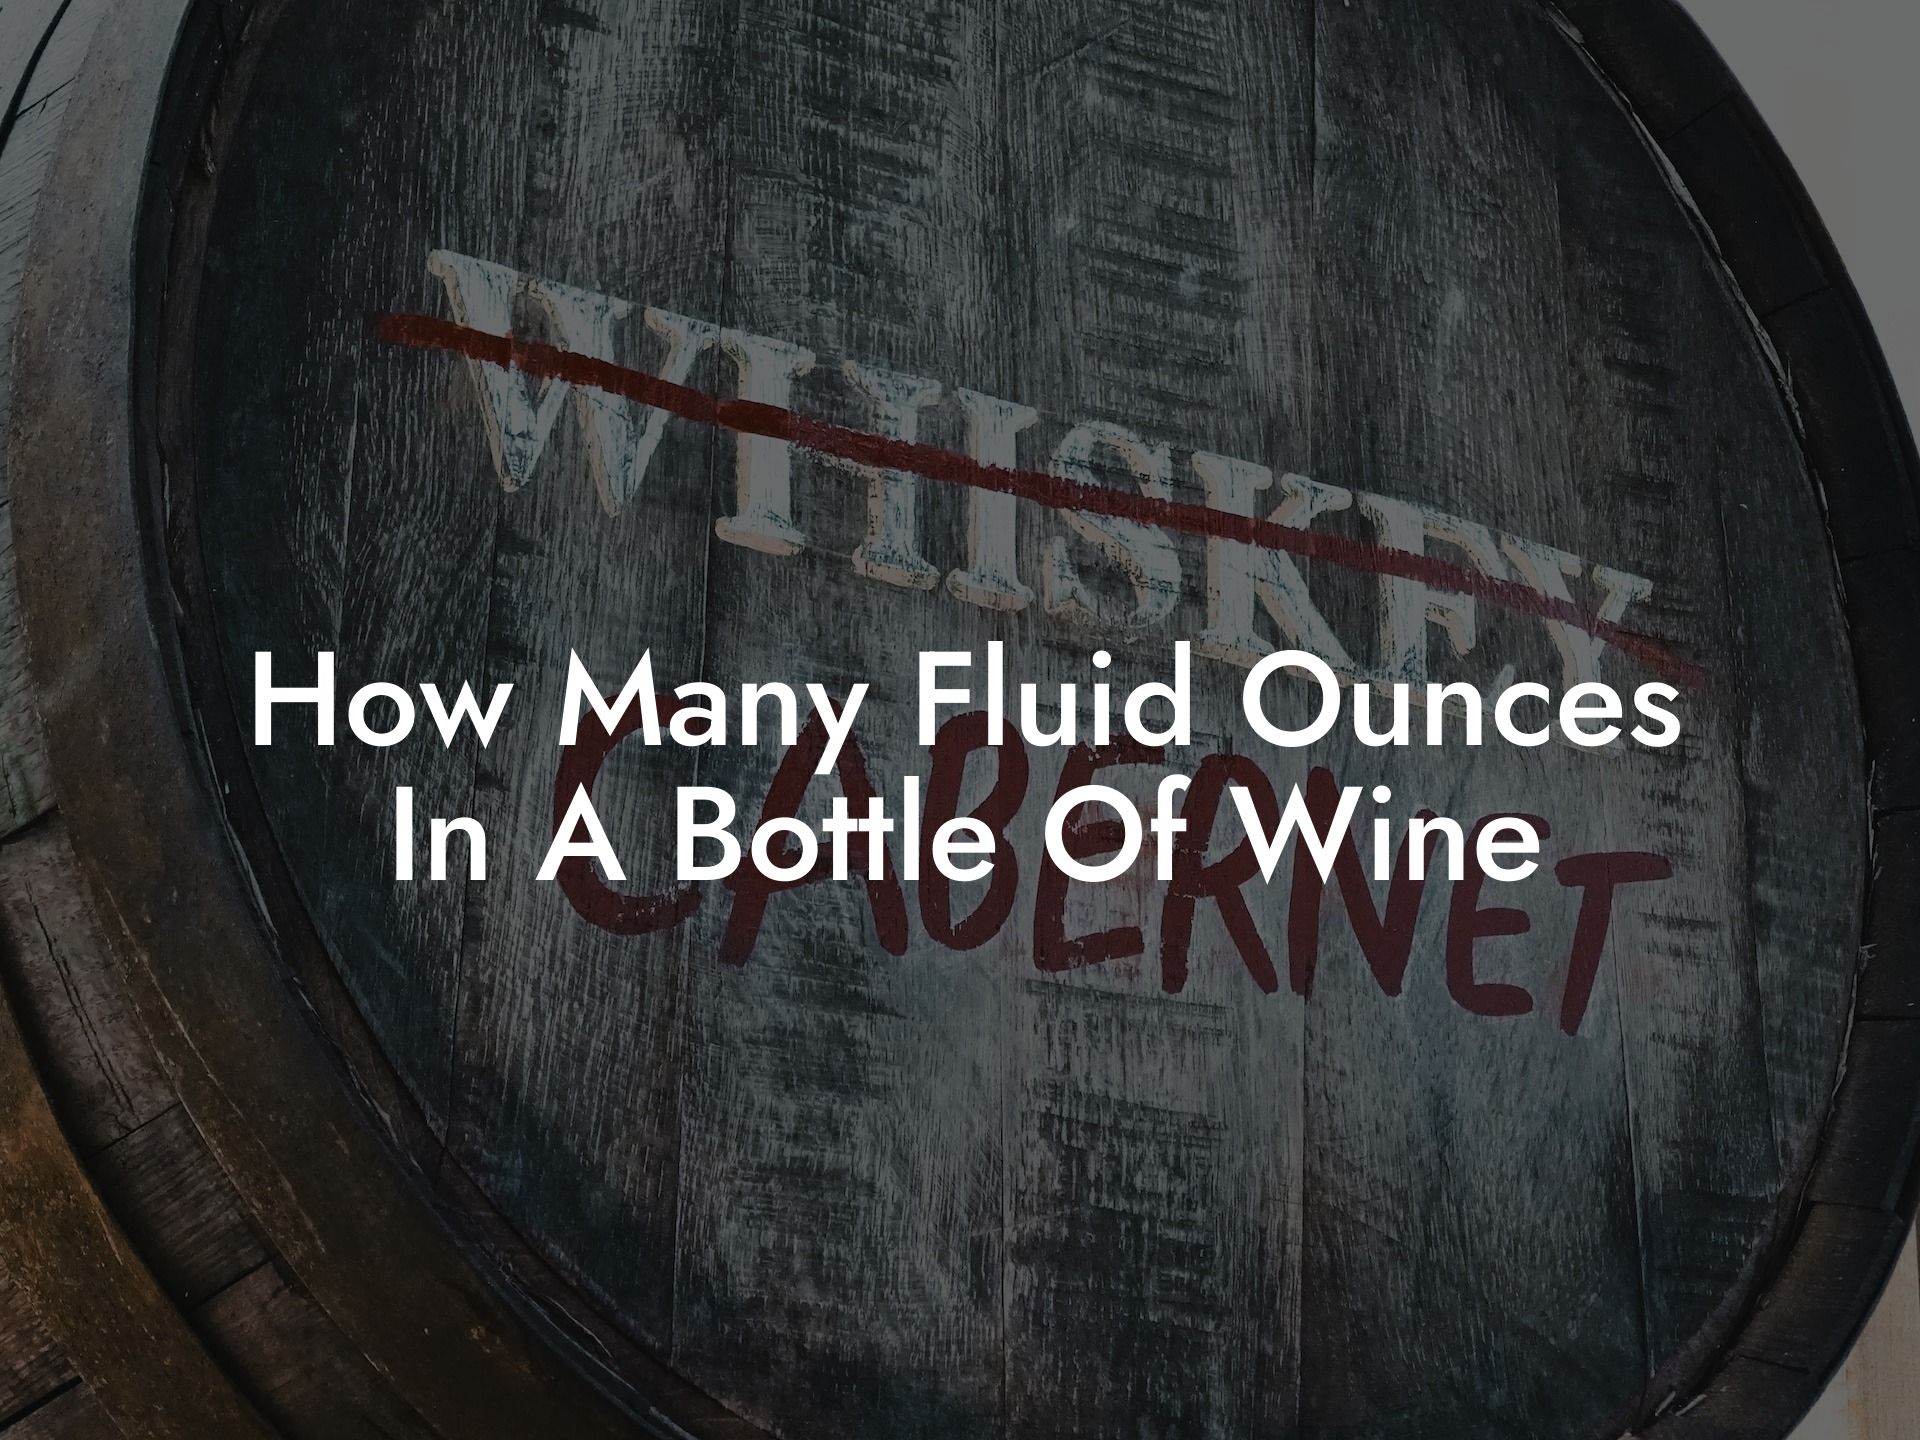 How Many Fluid Ounces In A Bottle Of Wine